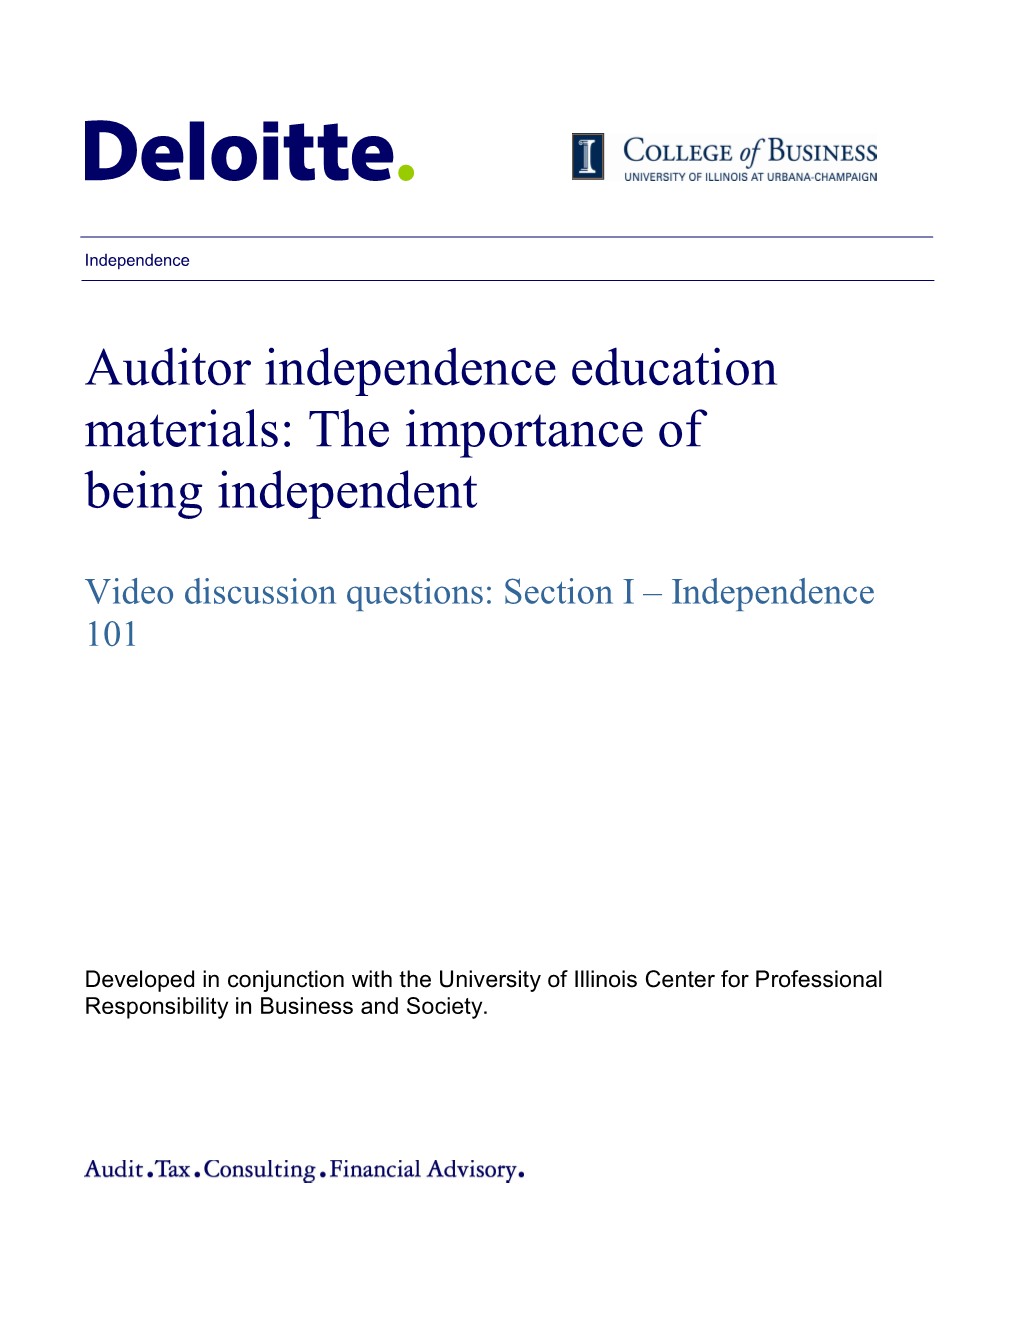 Auditor Independence Education Materials: the Importance of Being Independent